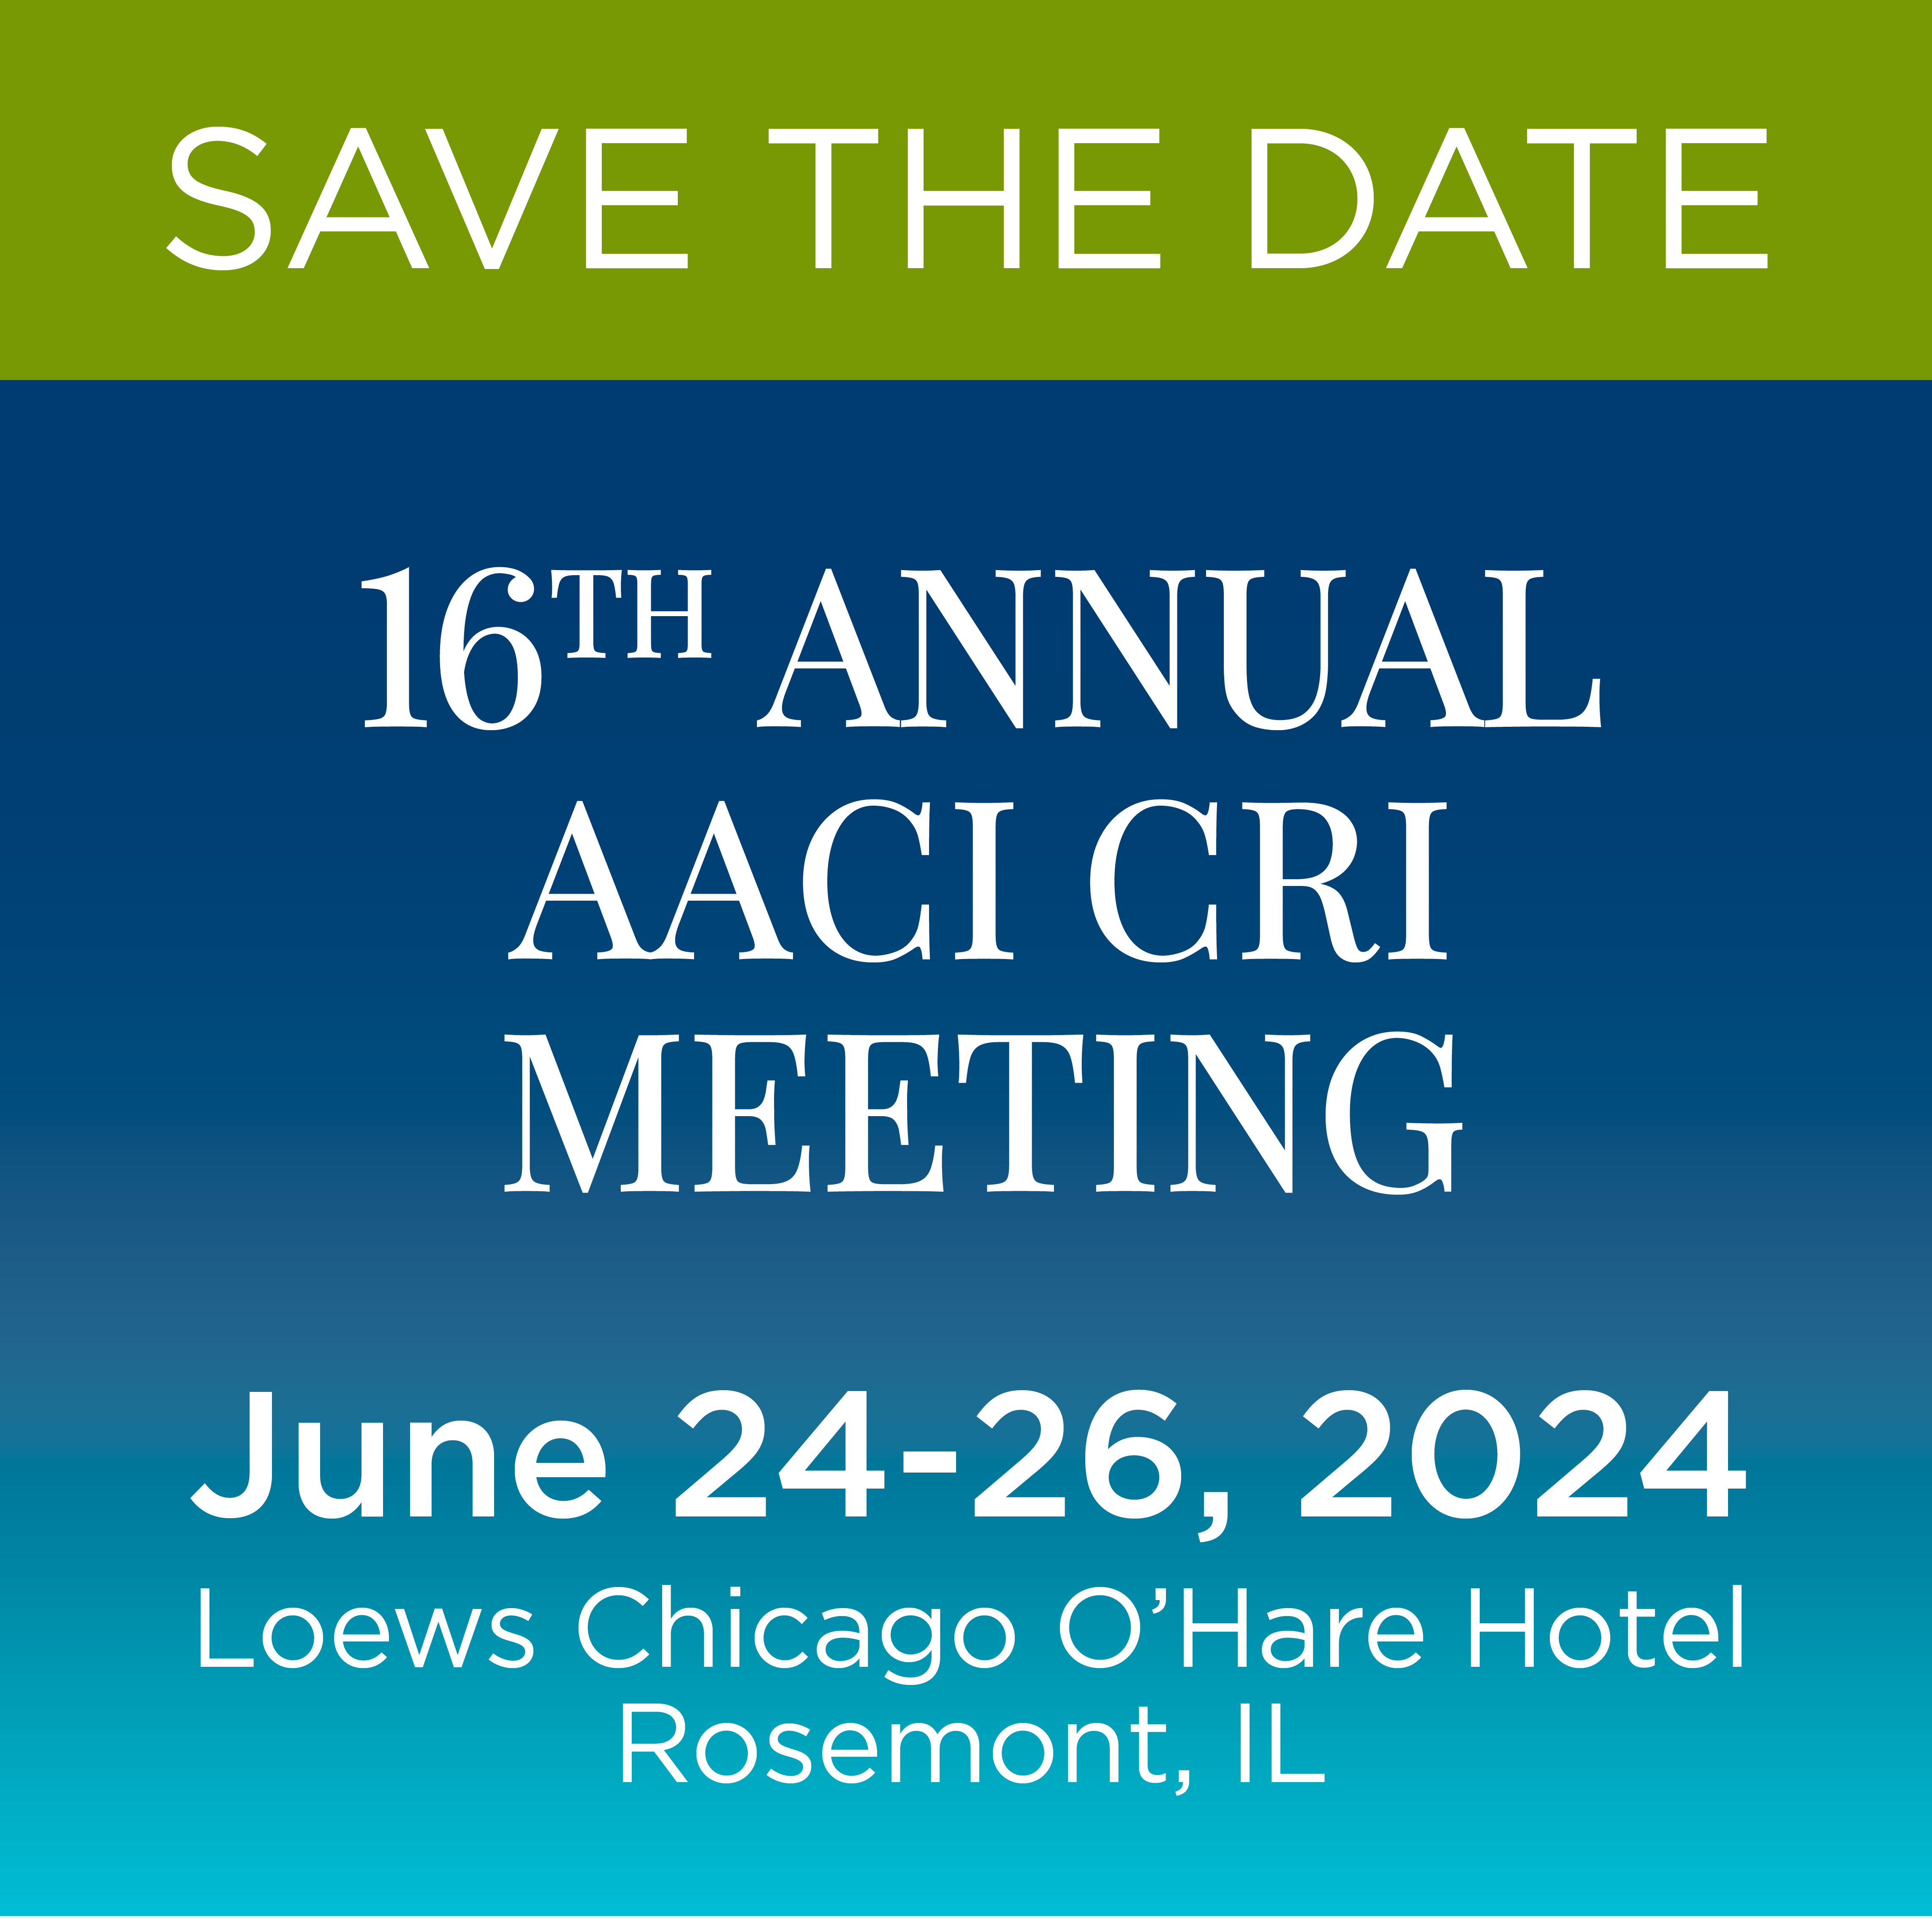 AACI CRI Annual Meeting Association of American Cancer Institutes